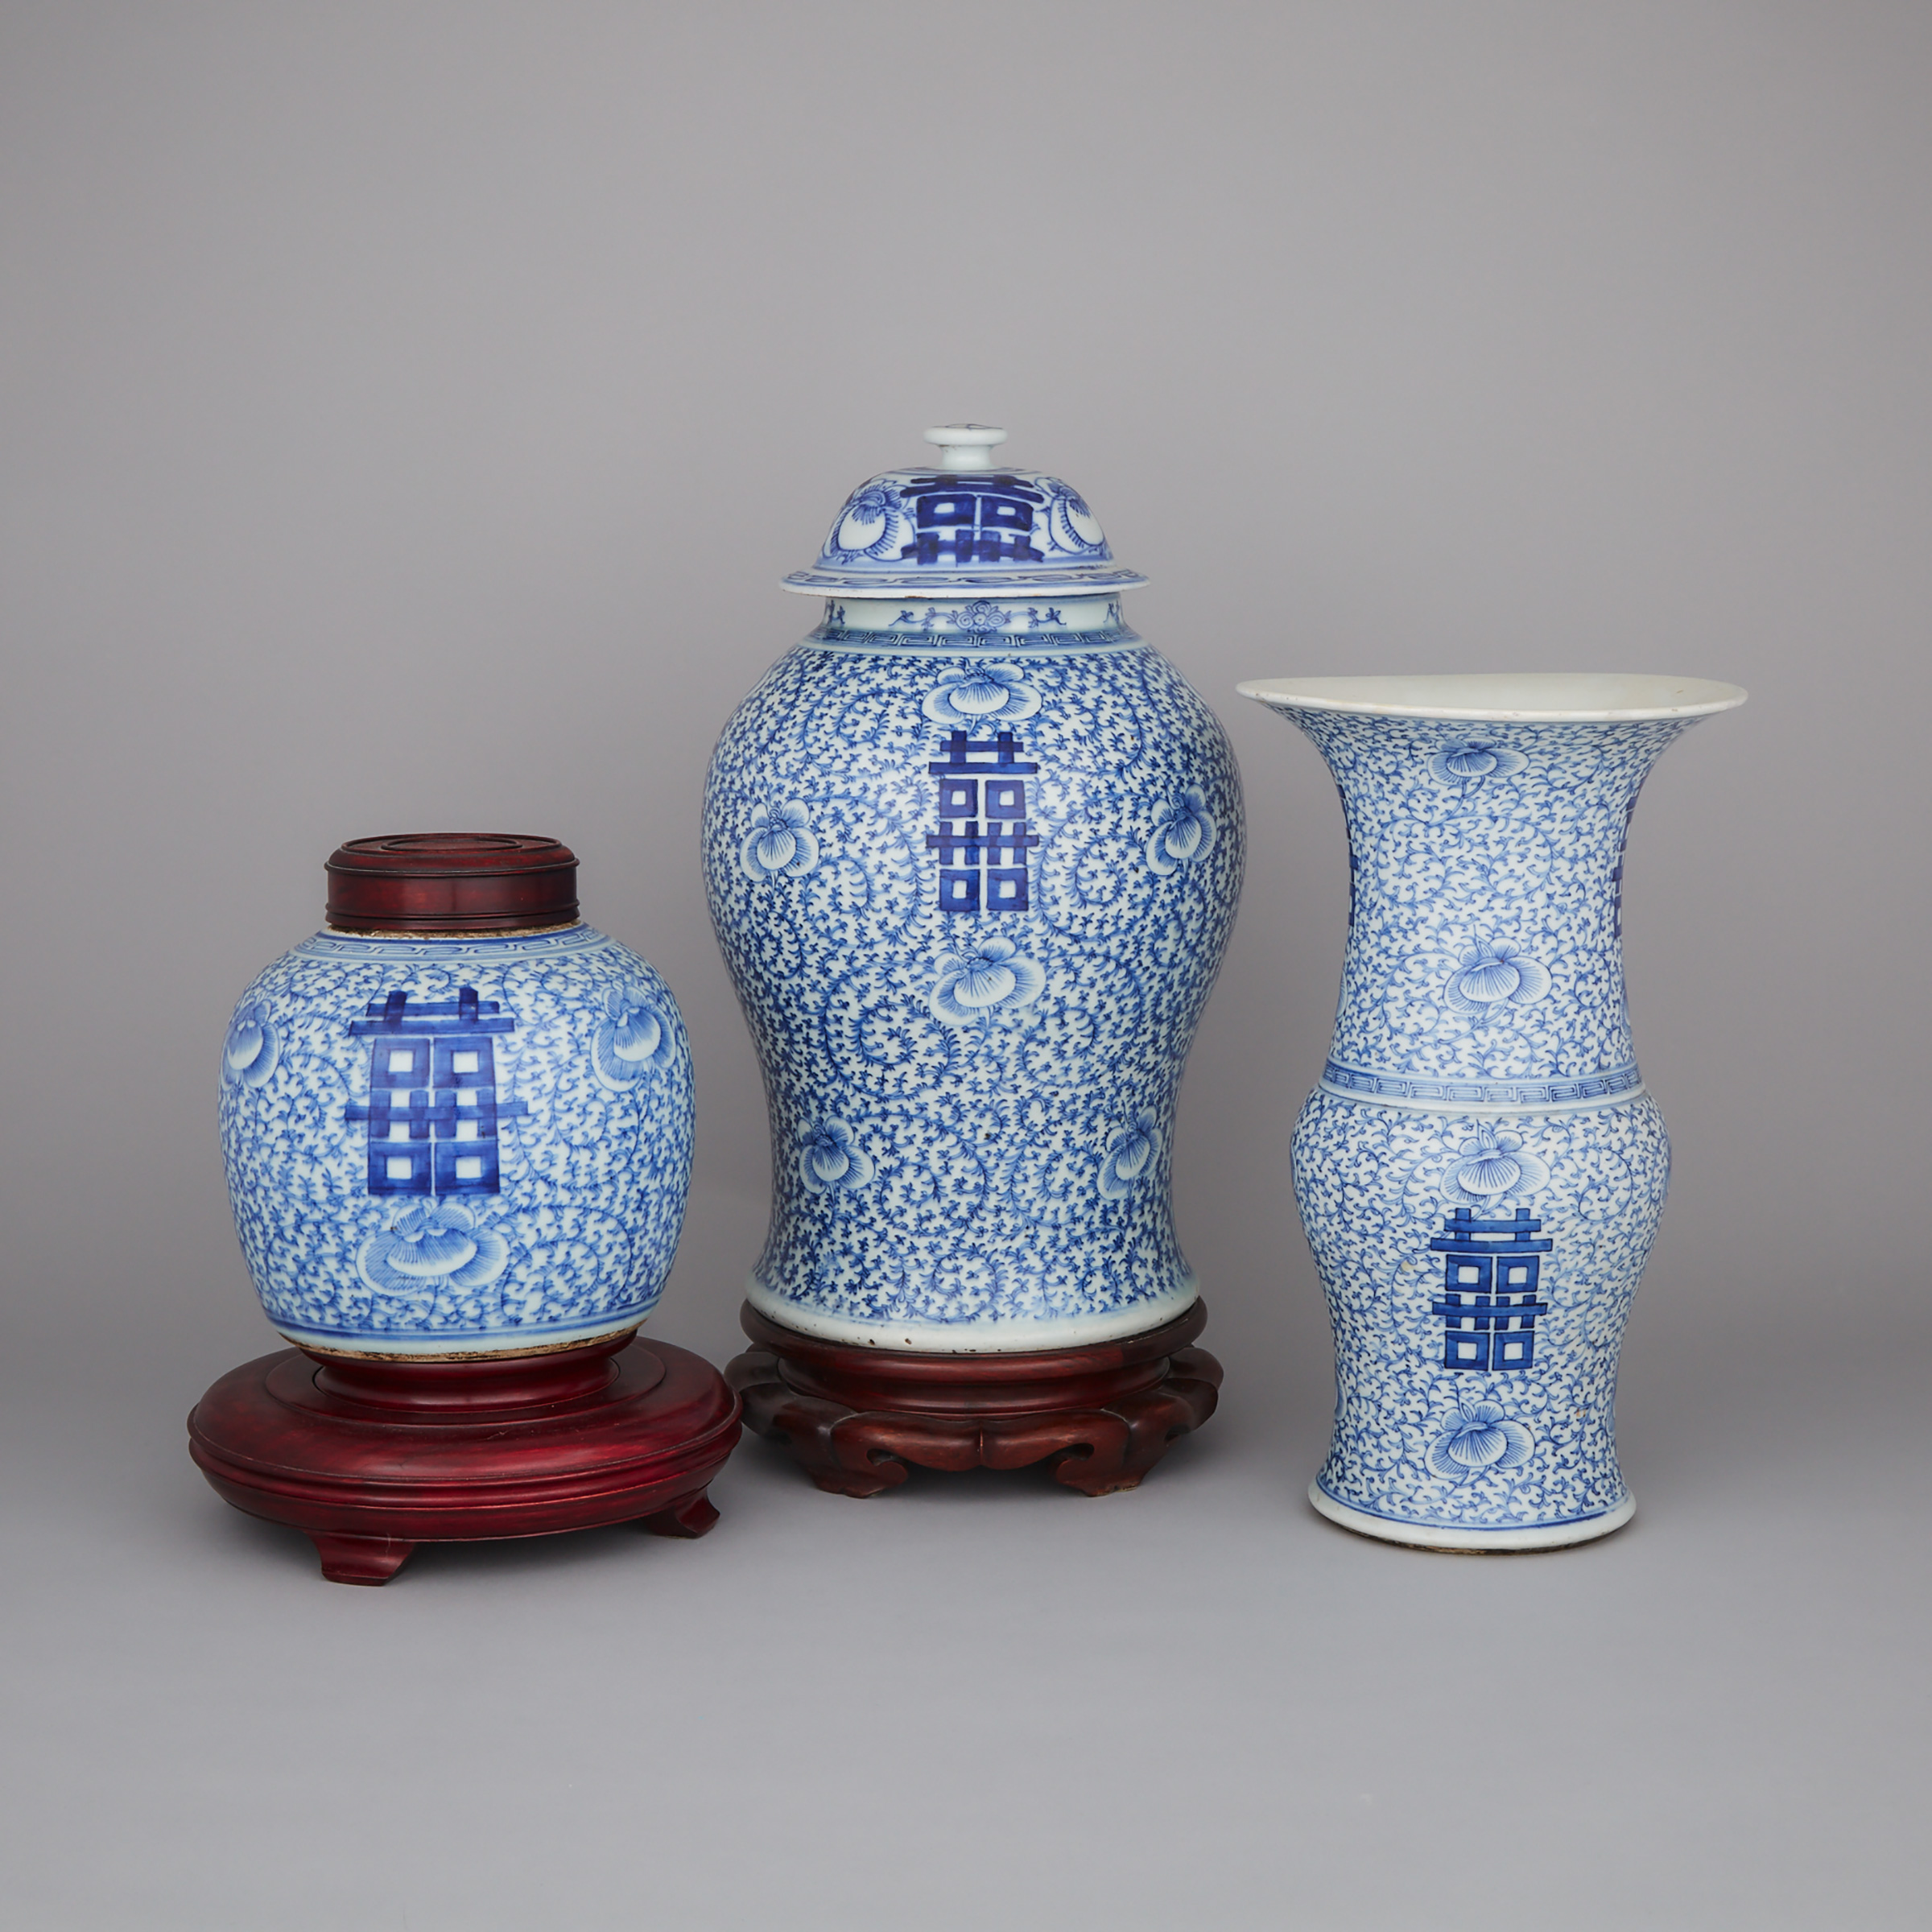 A Group of Three Blue and White ‘Double Happiness’ Vases